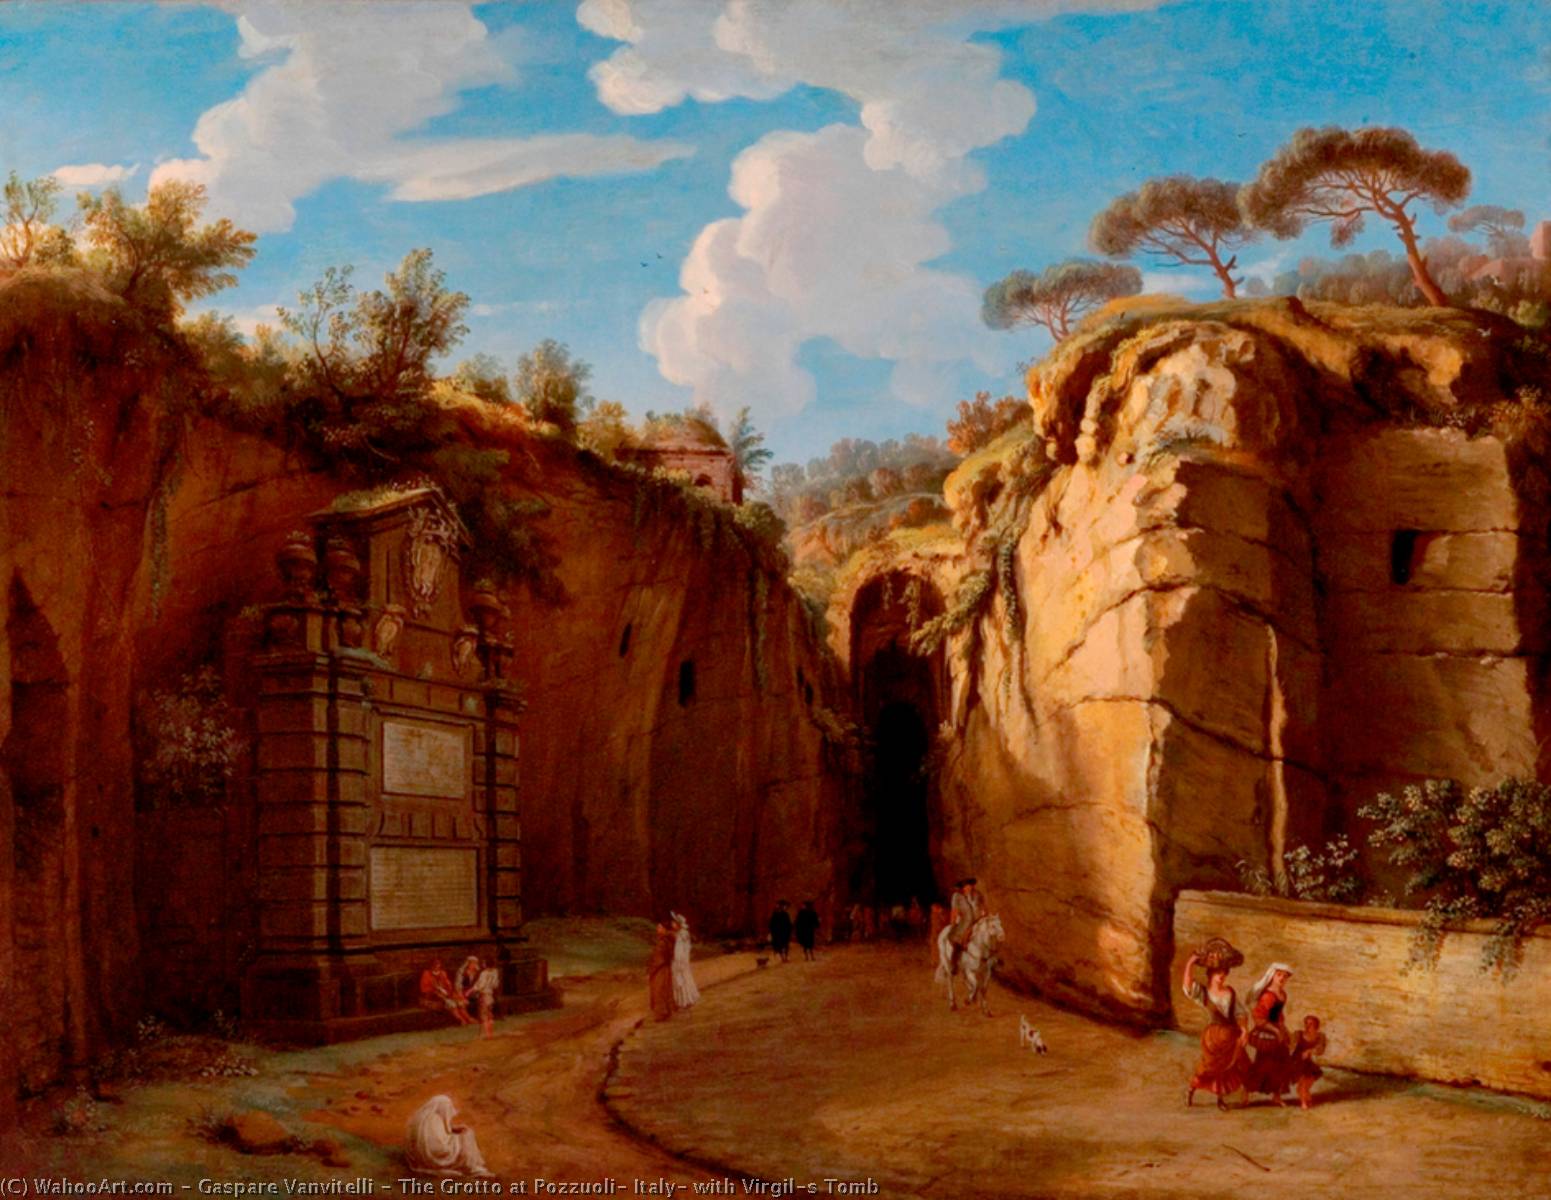 WikiOO.org - 백과 사전 - 회화, 삽화 Gaspare Vanvitelli - The Grotto at Pozzuoli, Italy, with Virgil's Tomb